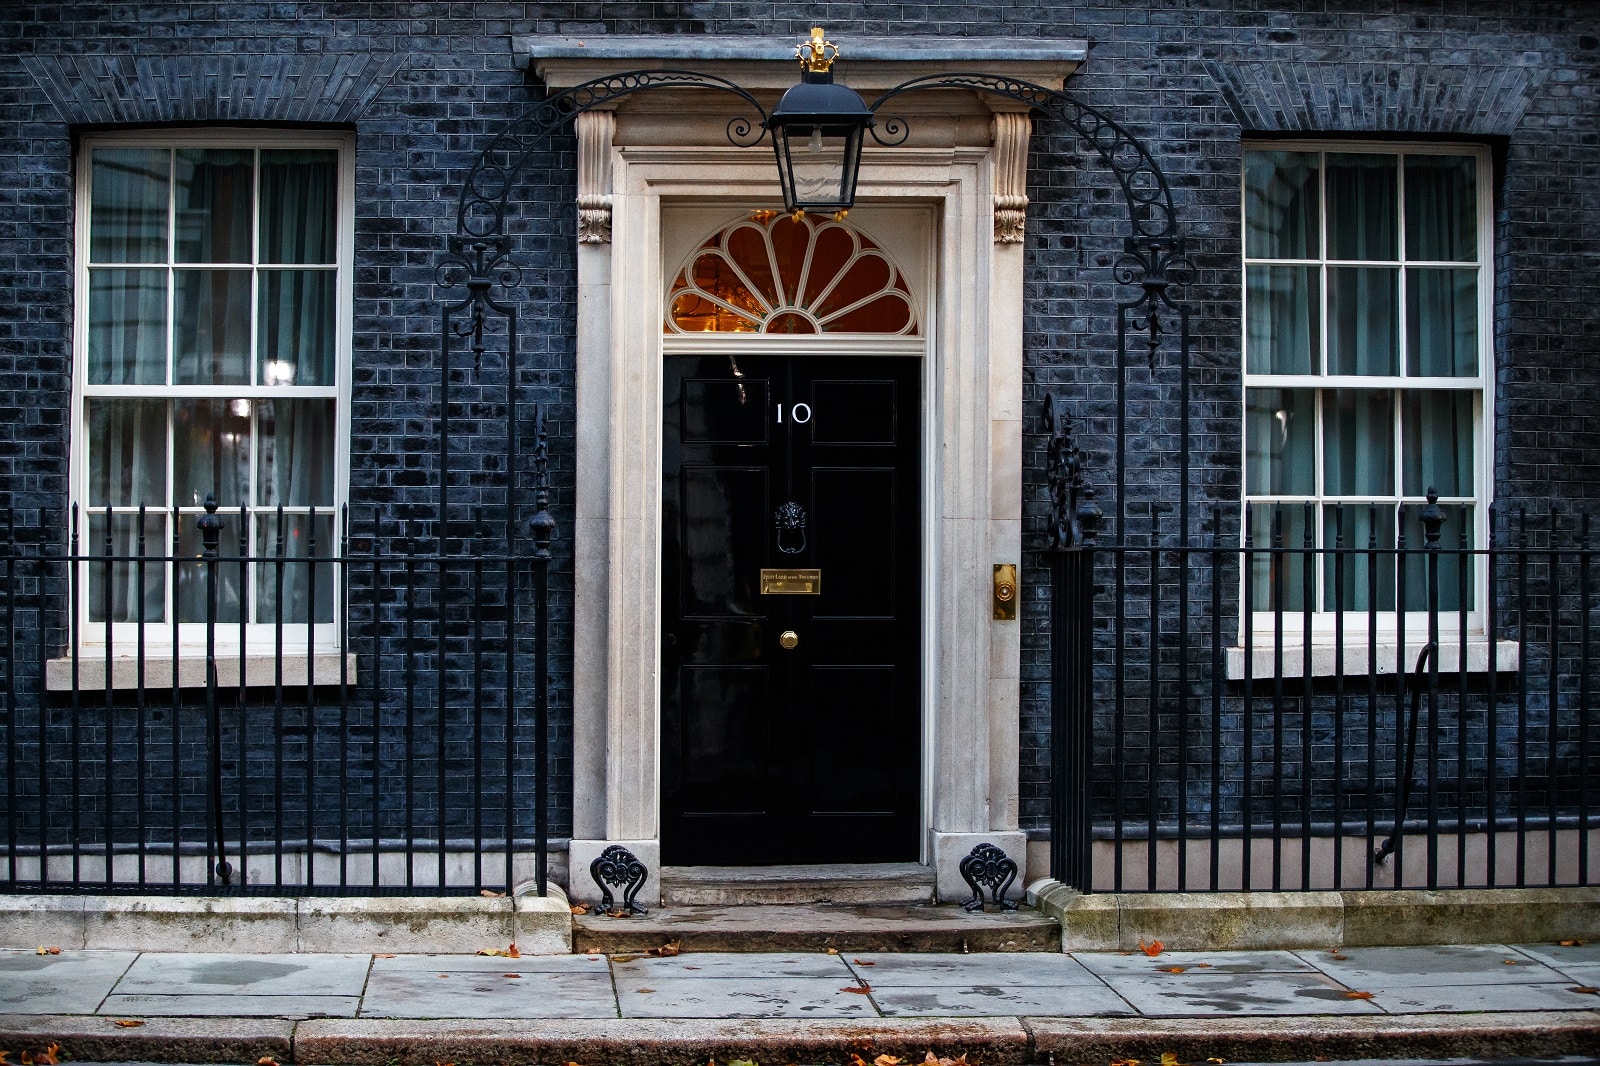 Image Credit: Shutterstock / zjtmath <p><span>Lizz Truss spent the least amount of time in Number 10 than any Prime Minister in history, ousted after being presented with a budget of  £45bn in unfunded tax cuts, which saw interest rates soar and mortgages increase across the country.</span></p>